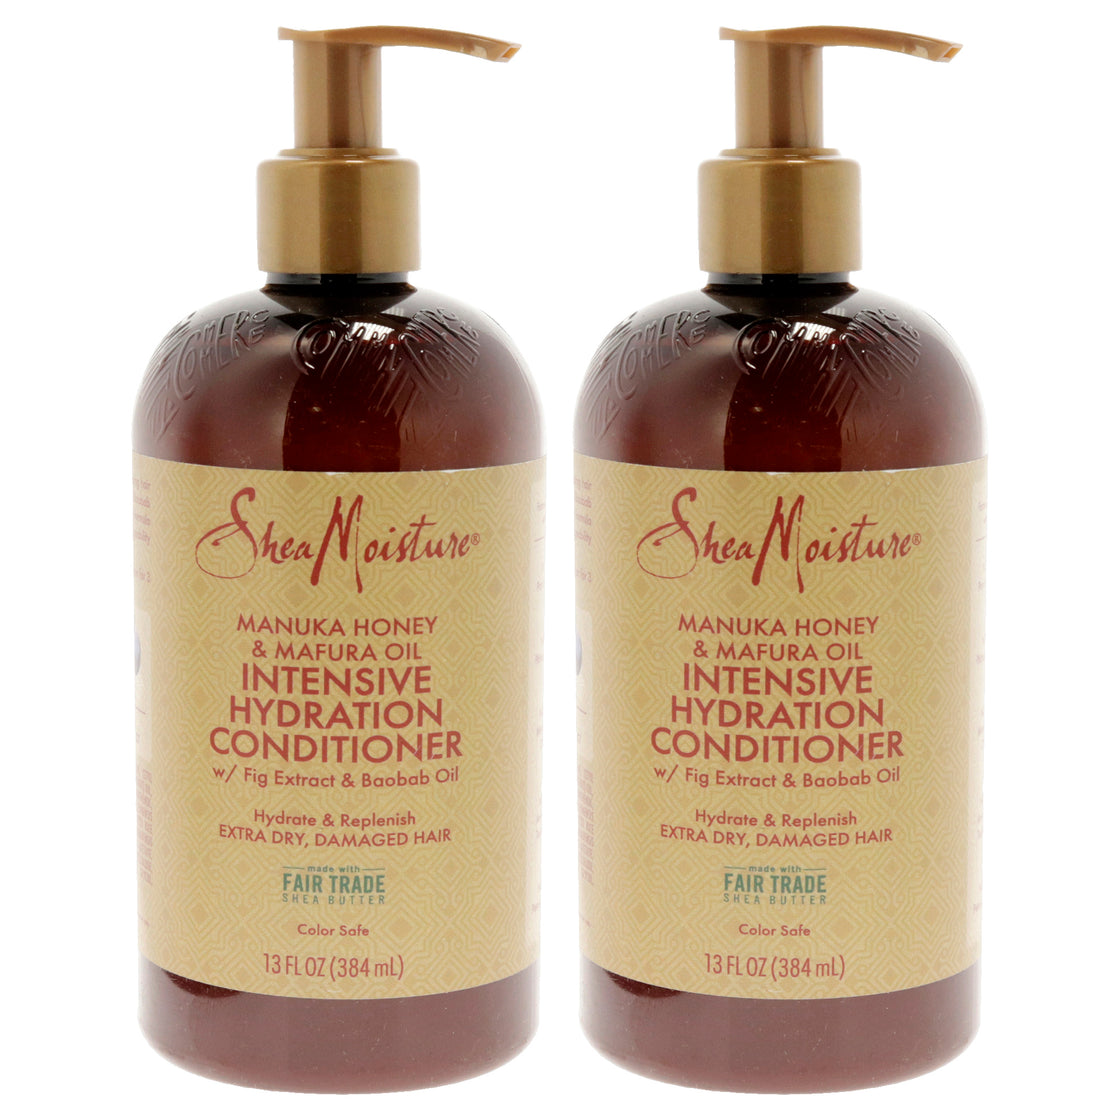 Manuka Honey & Mafura Oil Intensive Hydration Conditioner - Pack of 2 by Shea Moisture for Unisex - 13 oz Conditioner